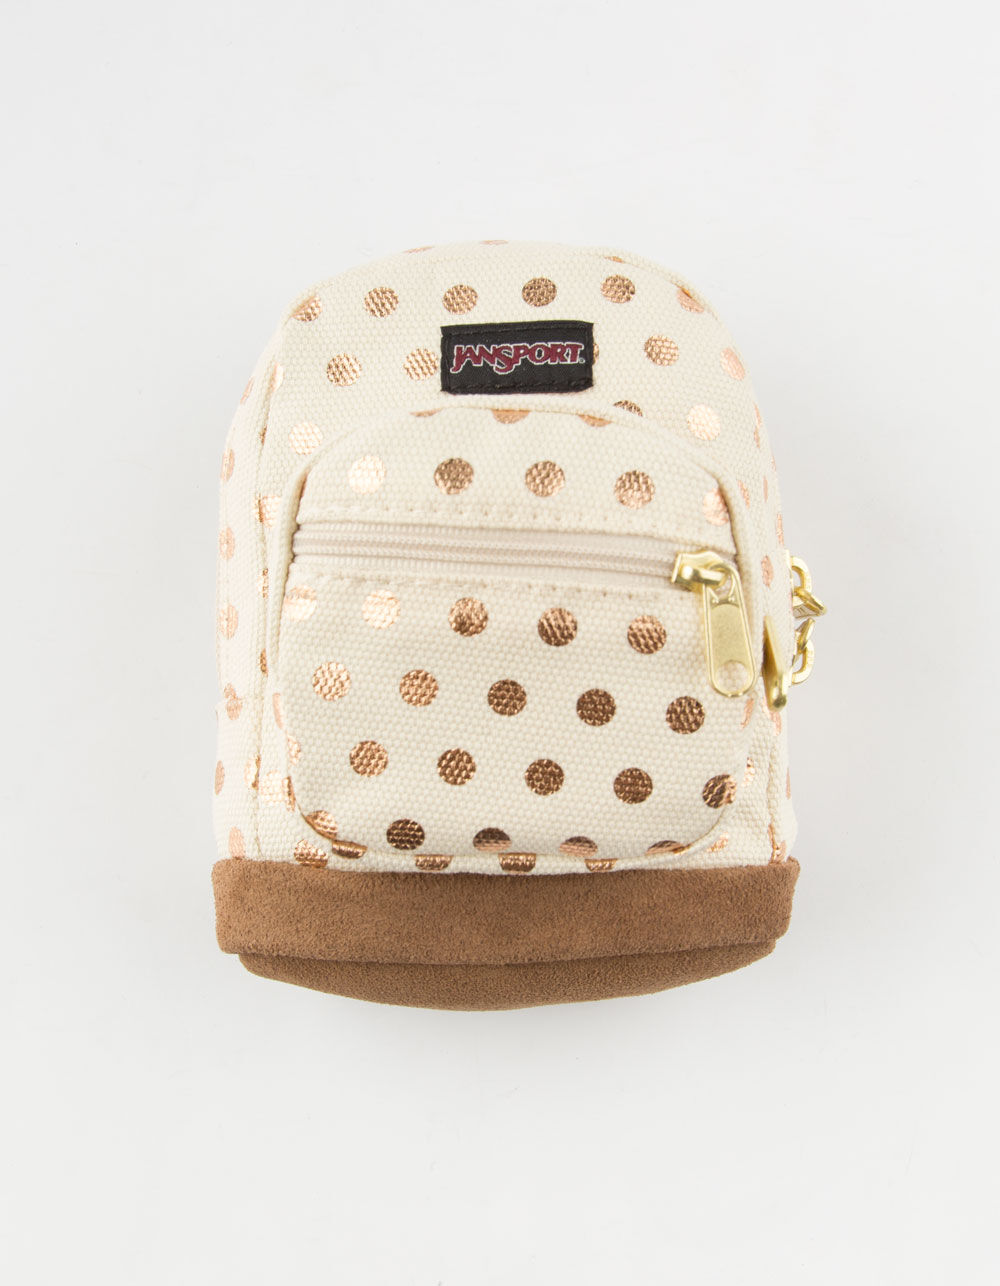 JANSPORT Right Pouch Gold Polka Dot Pouch image number 0